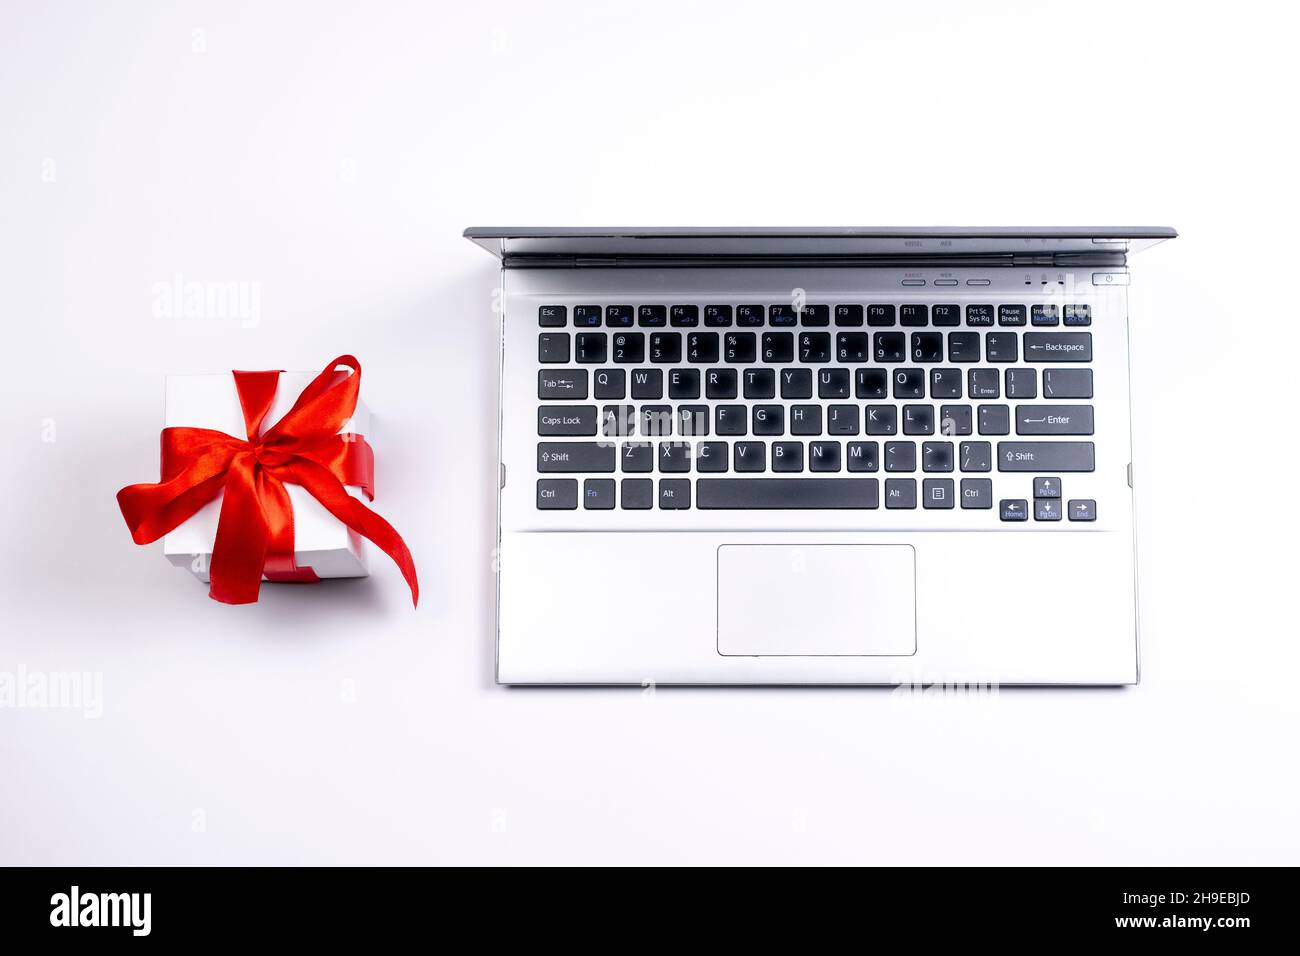 Old laptop and gift box with red ribbon on white background. Used silver notebook and present. Stock Photo